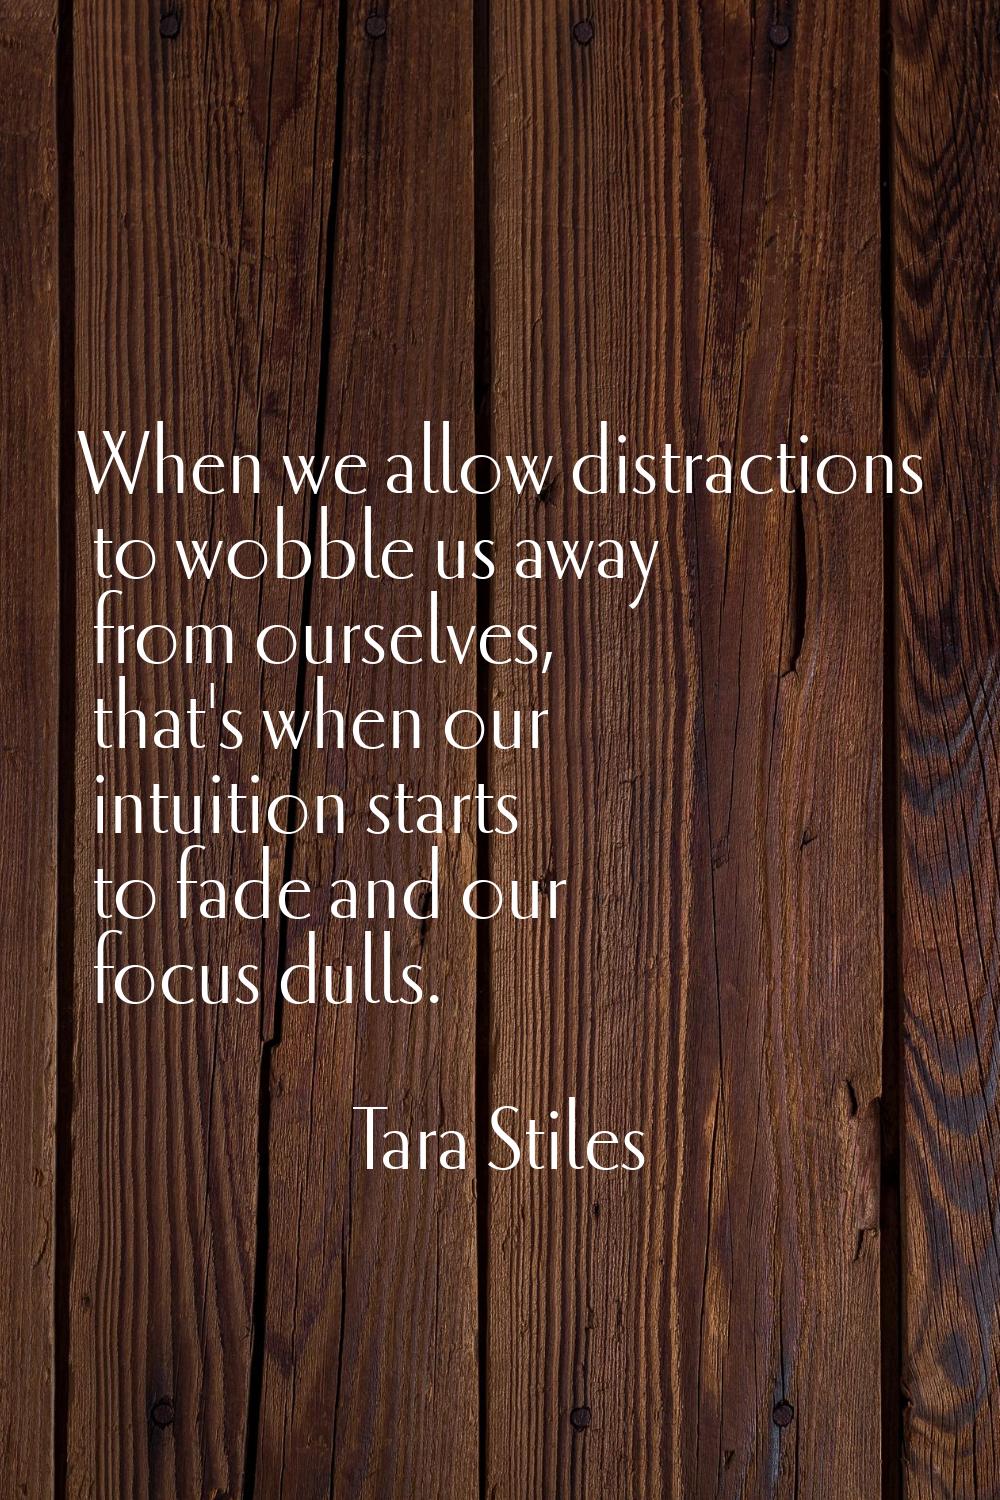 When we allow distractions to wobble us away from ourselves, that's when our intuition starts to fa